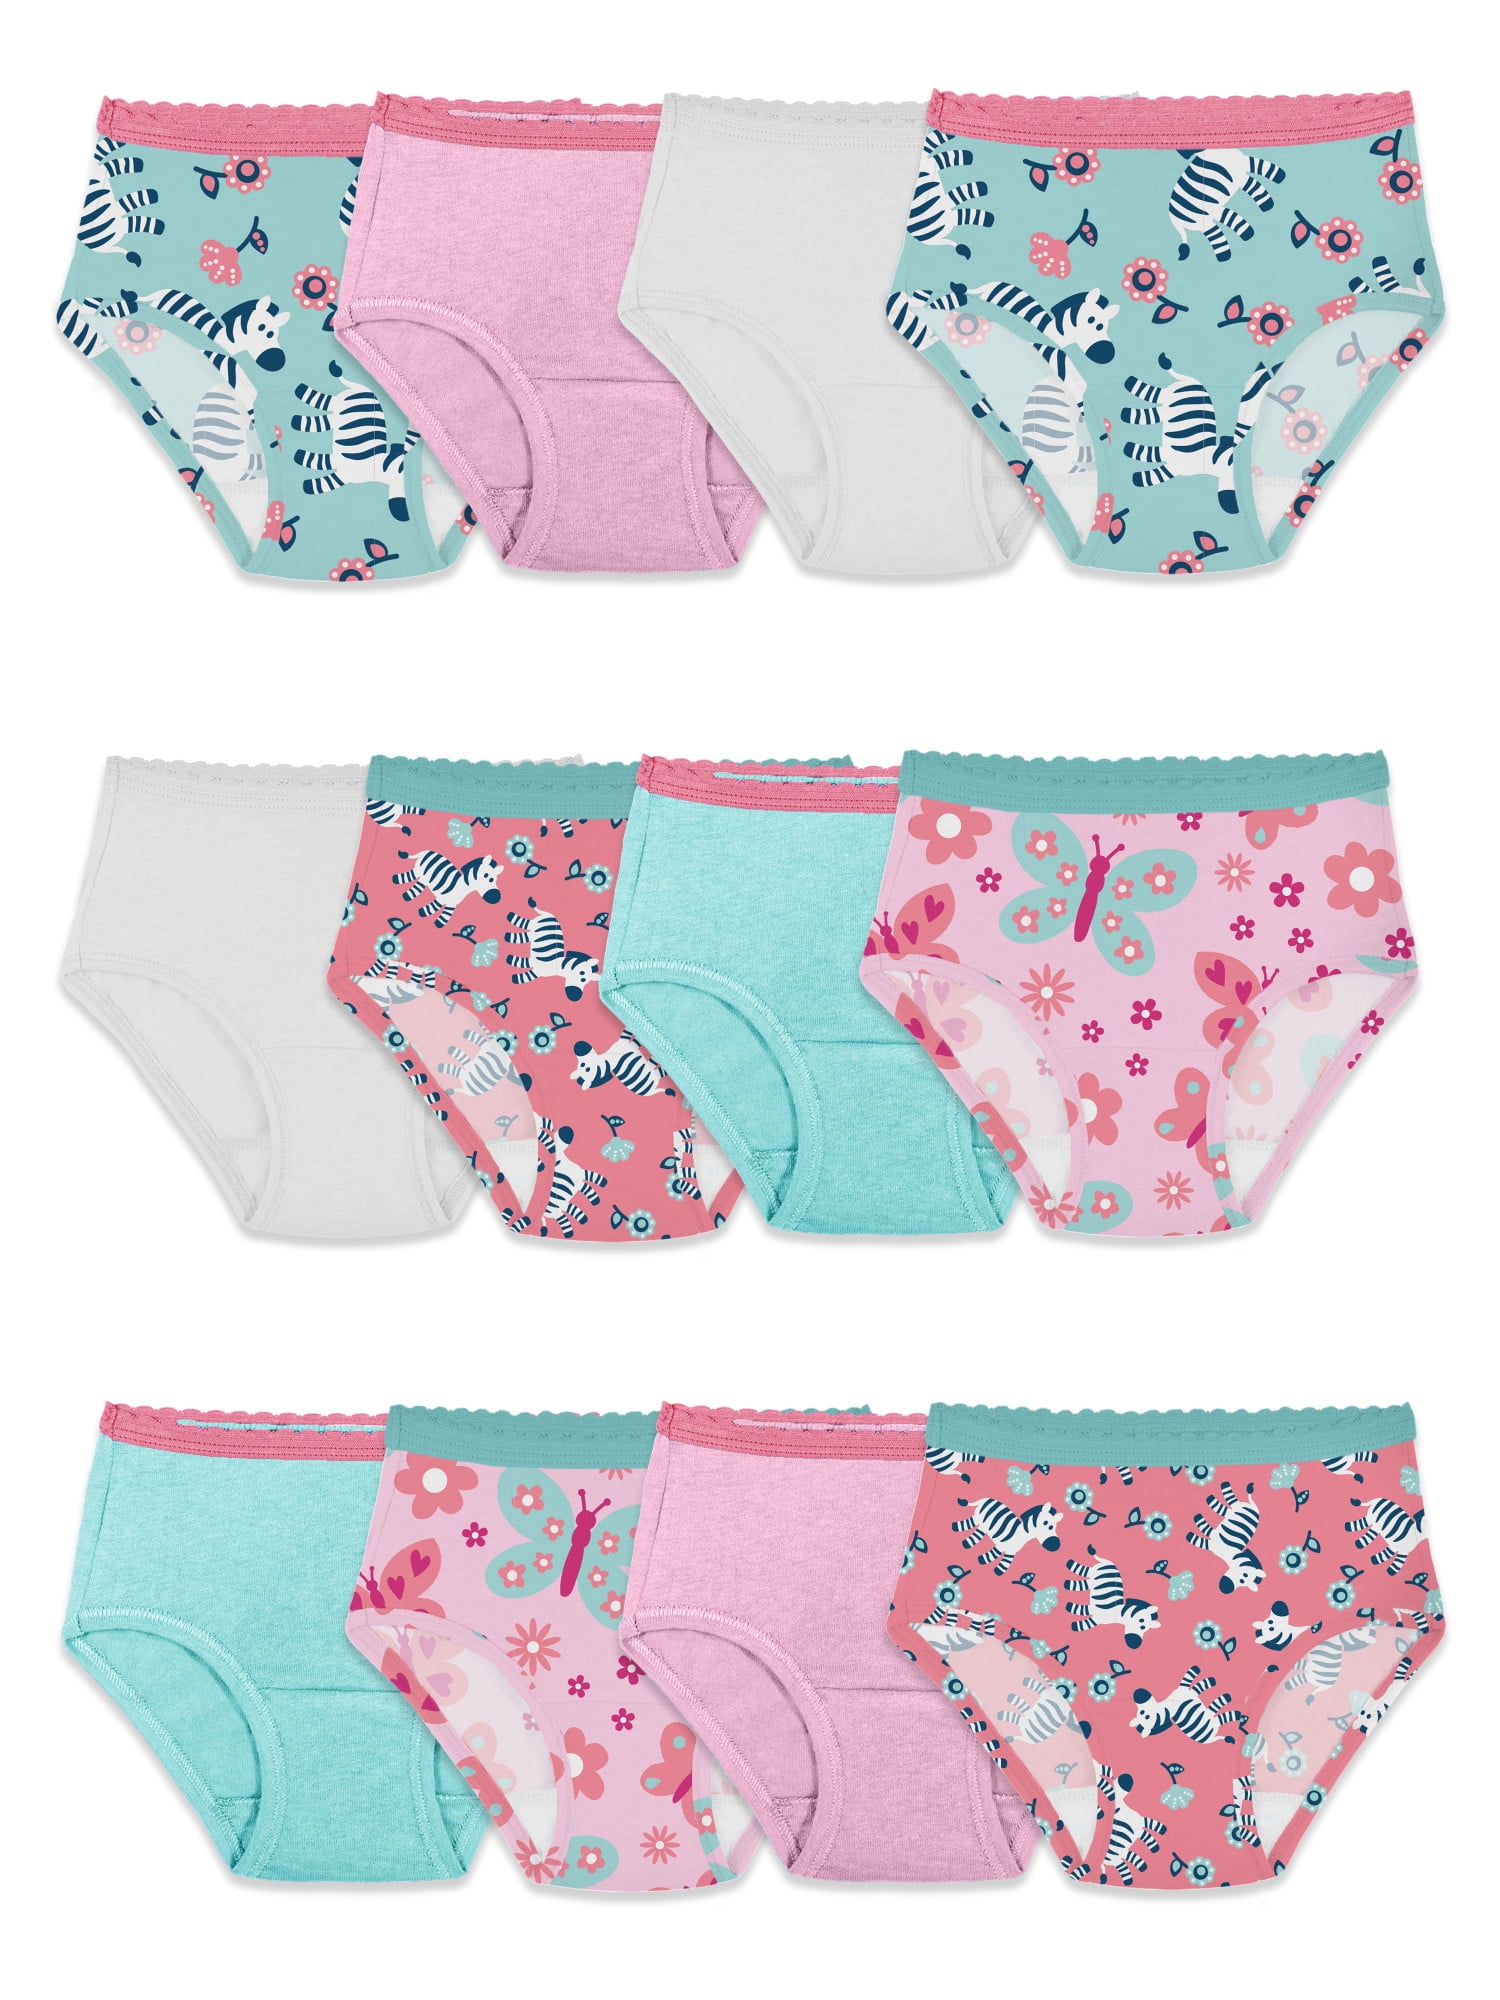 Toddler Size 2T/3T White, Pink & Blue Briefs With Coloring Page, 5-Pack